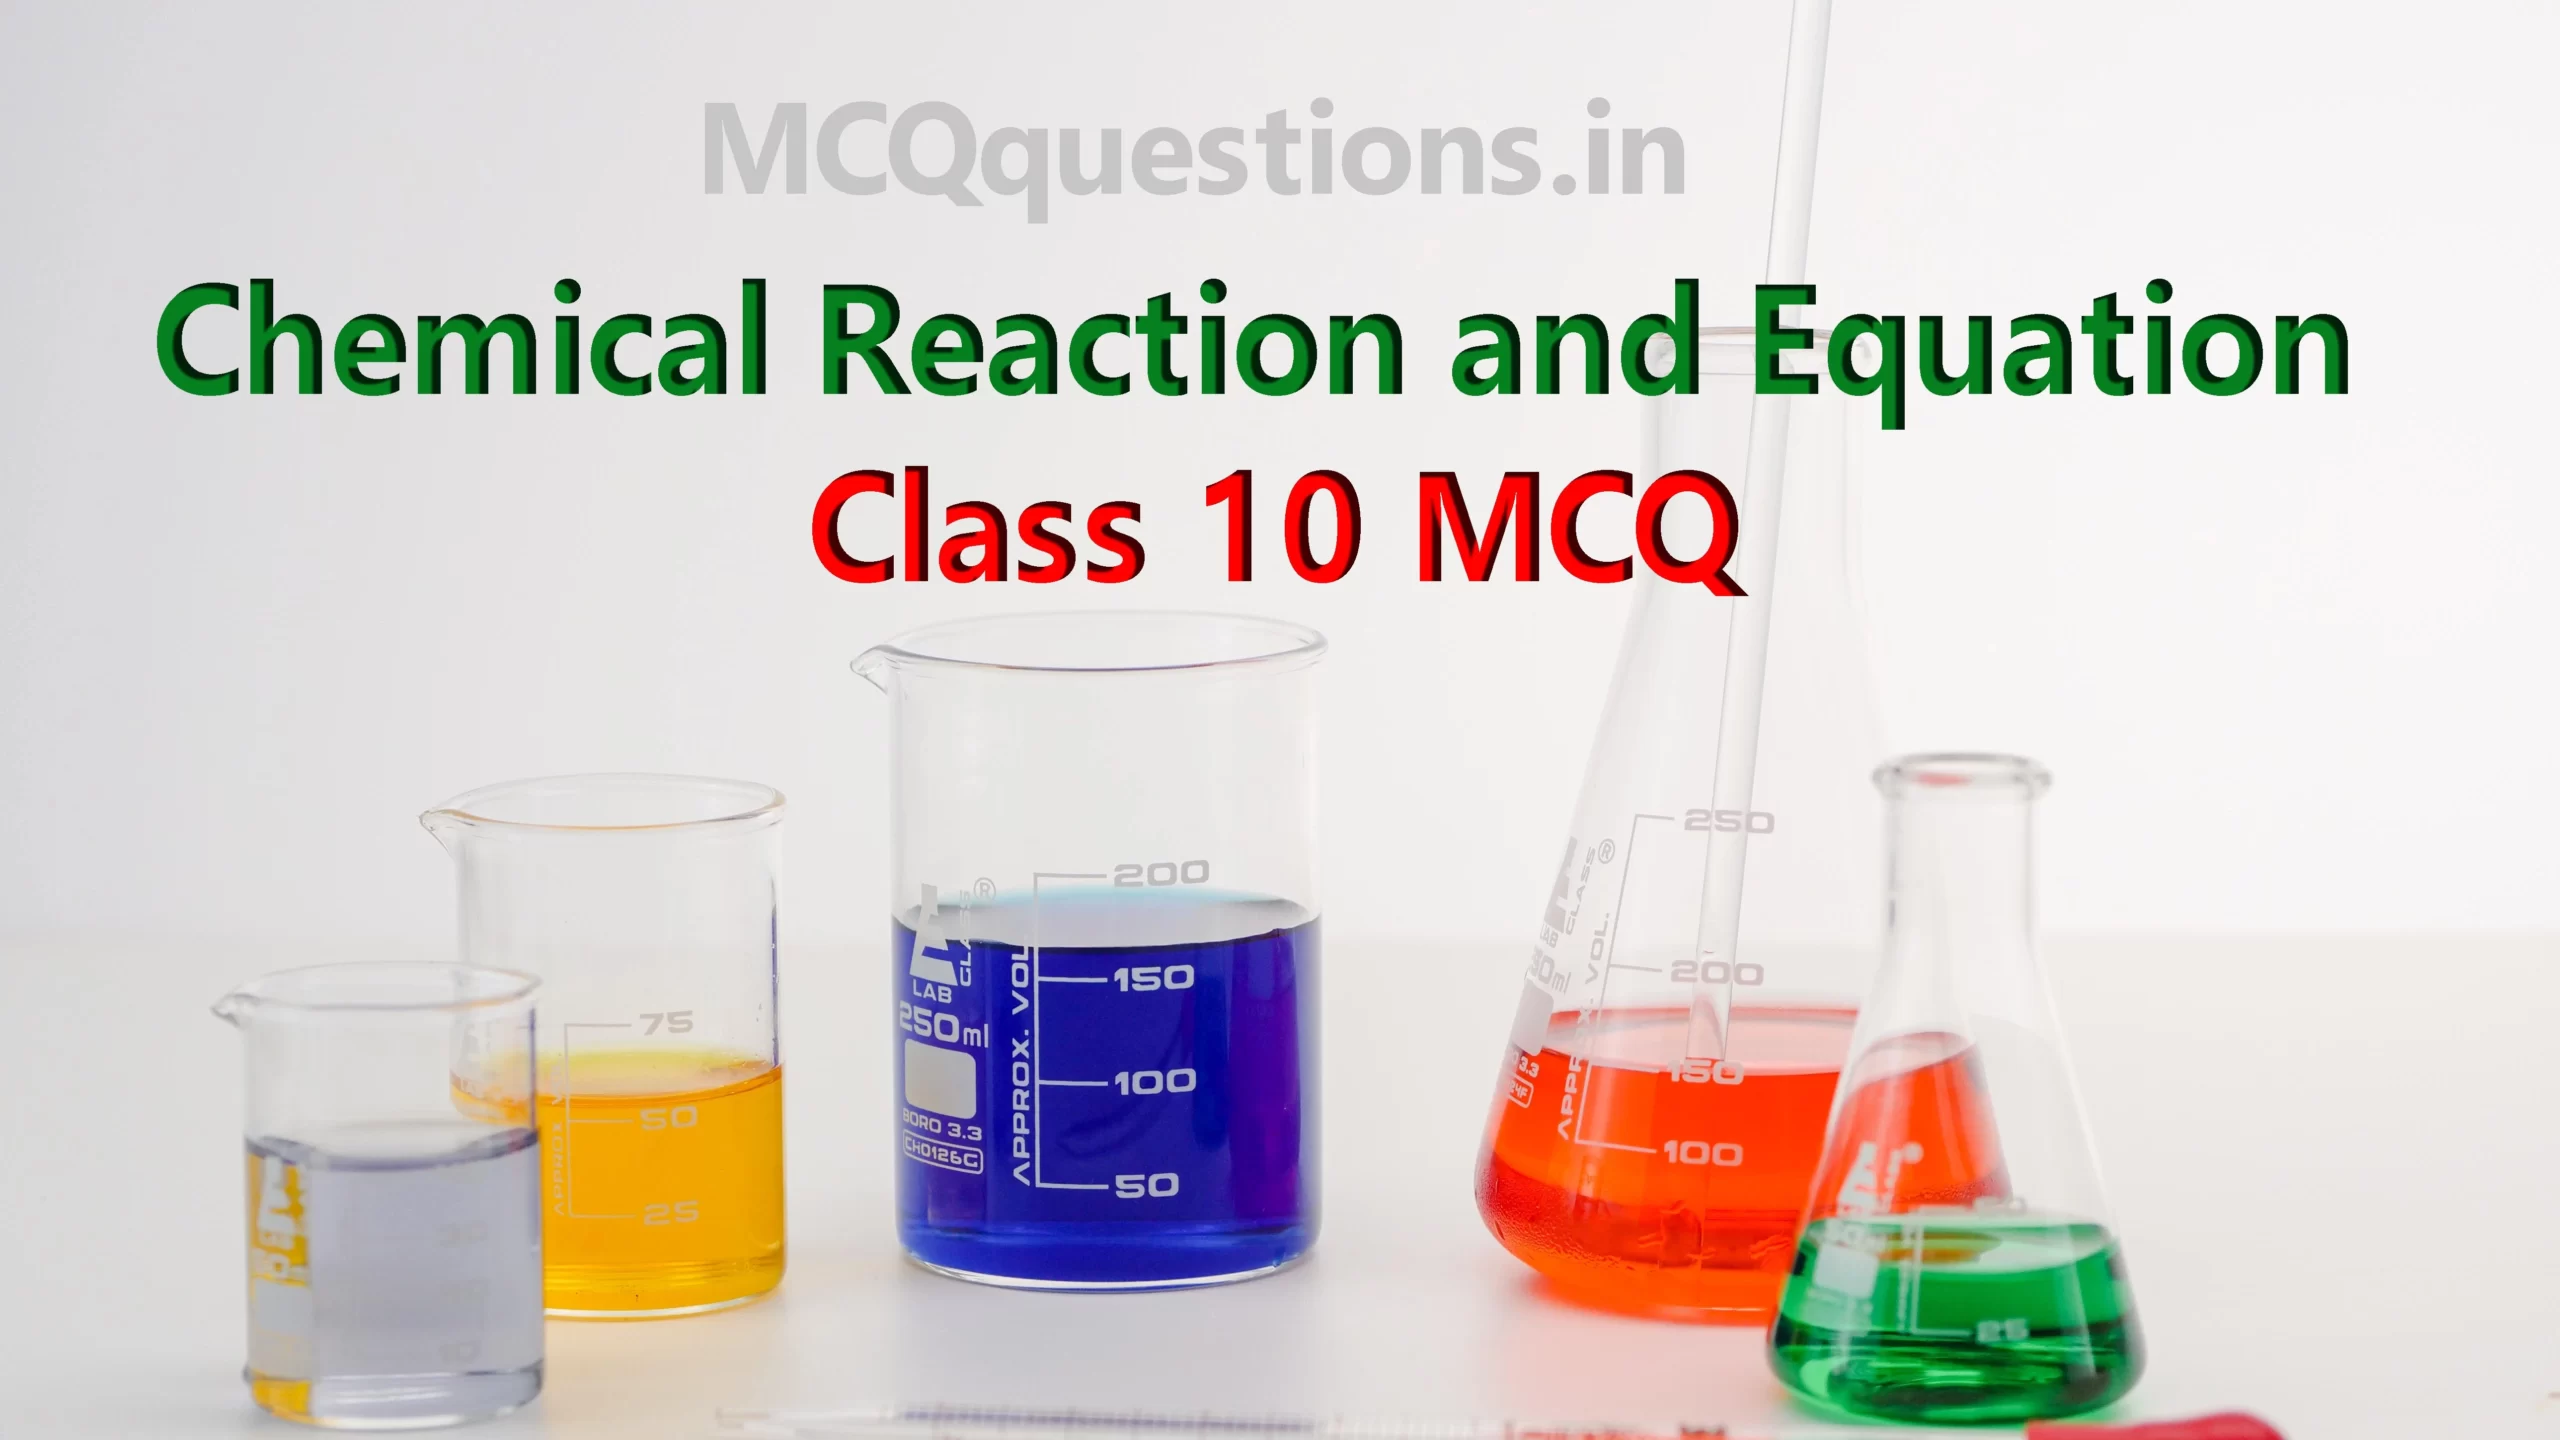 Chemical Reaction and Equation Class 10 MCQ